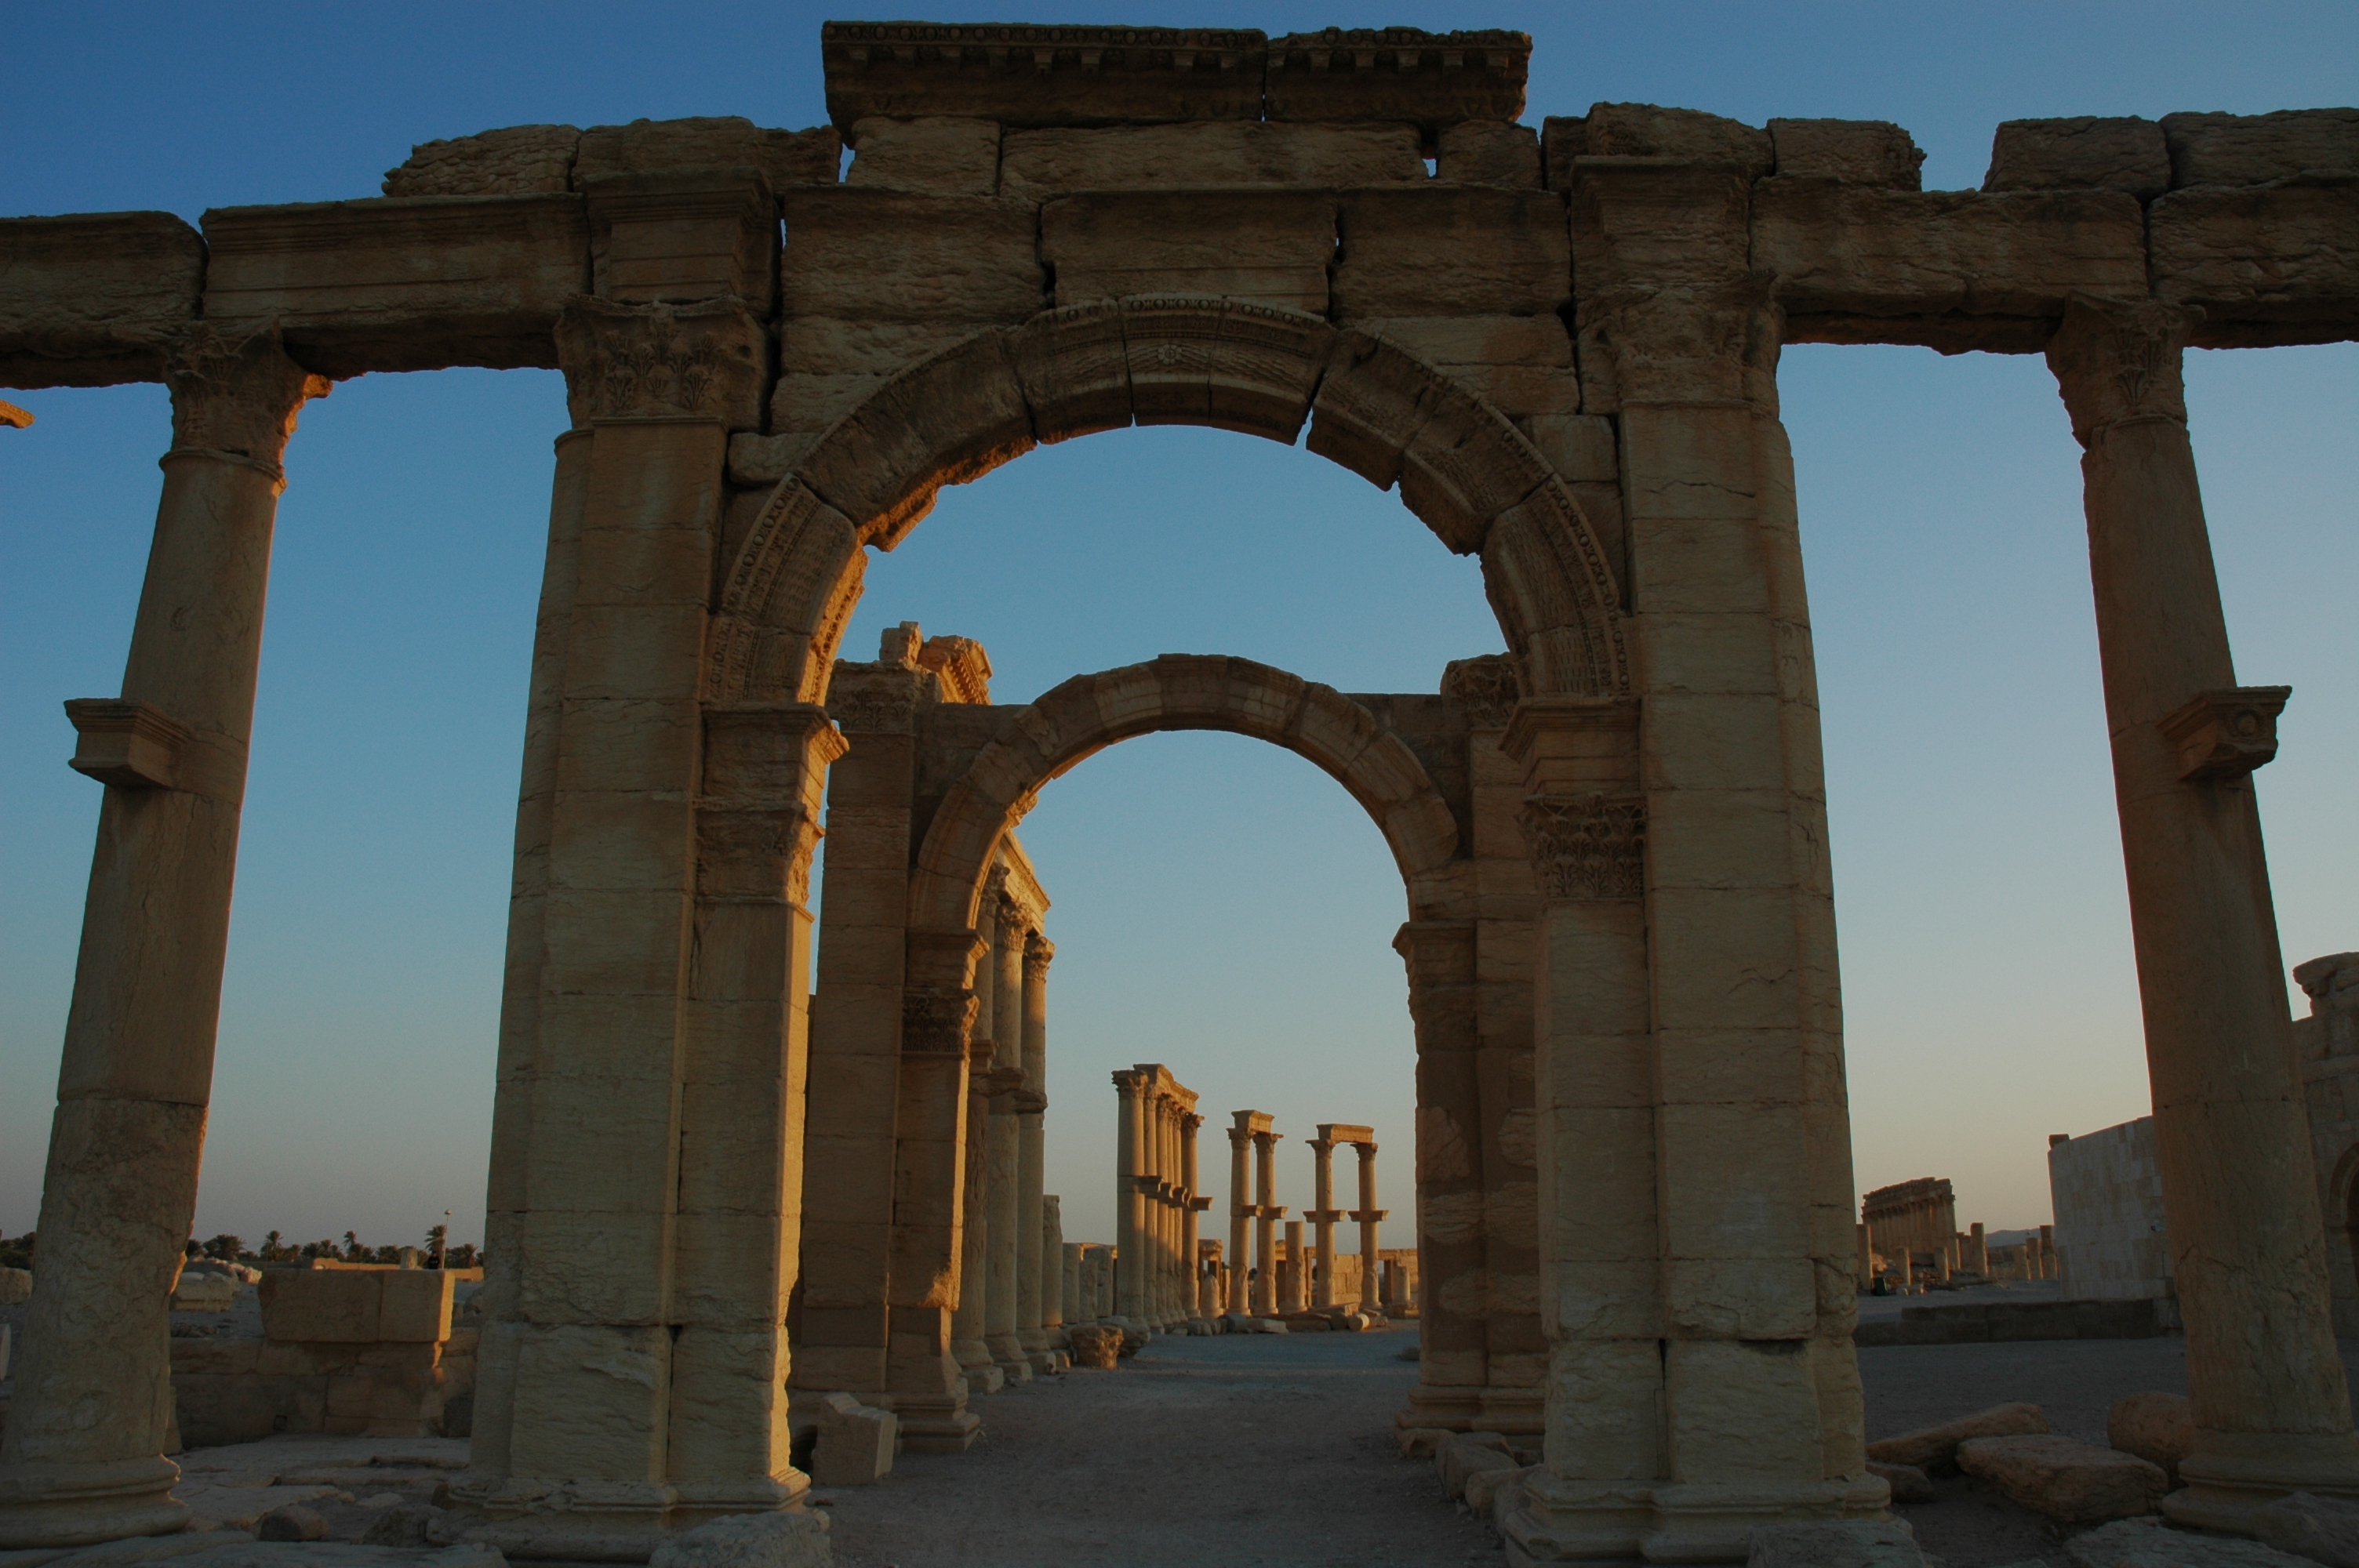 Illegal excavations and military use have recently endangered Palmyra, Syria, a UNESCO World Heritage Site. Photo: UNESCO/Ron von Oers 